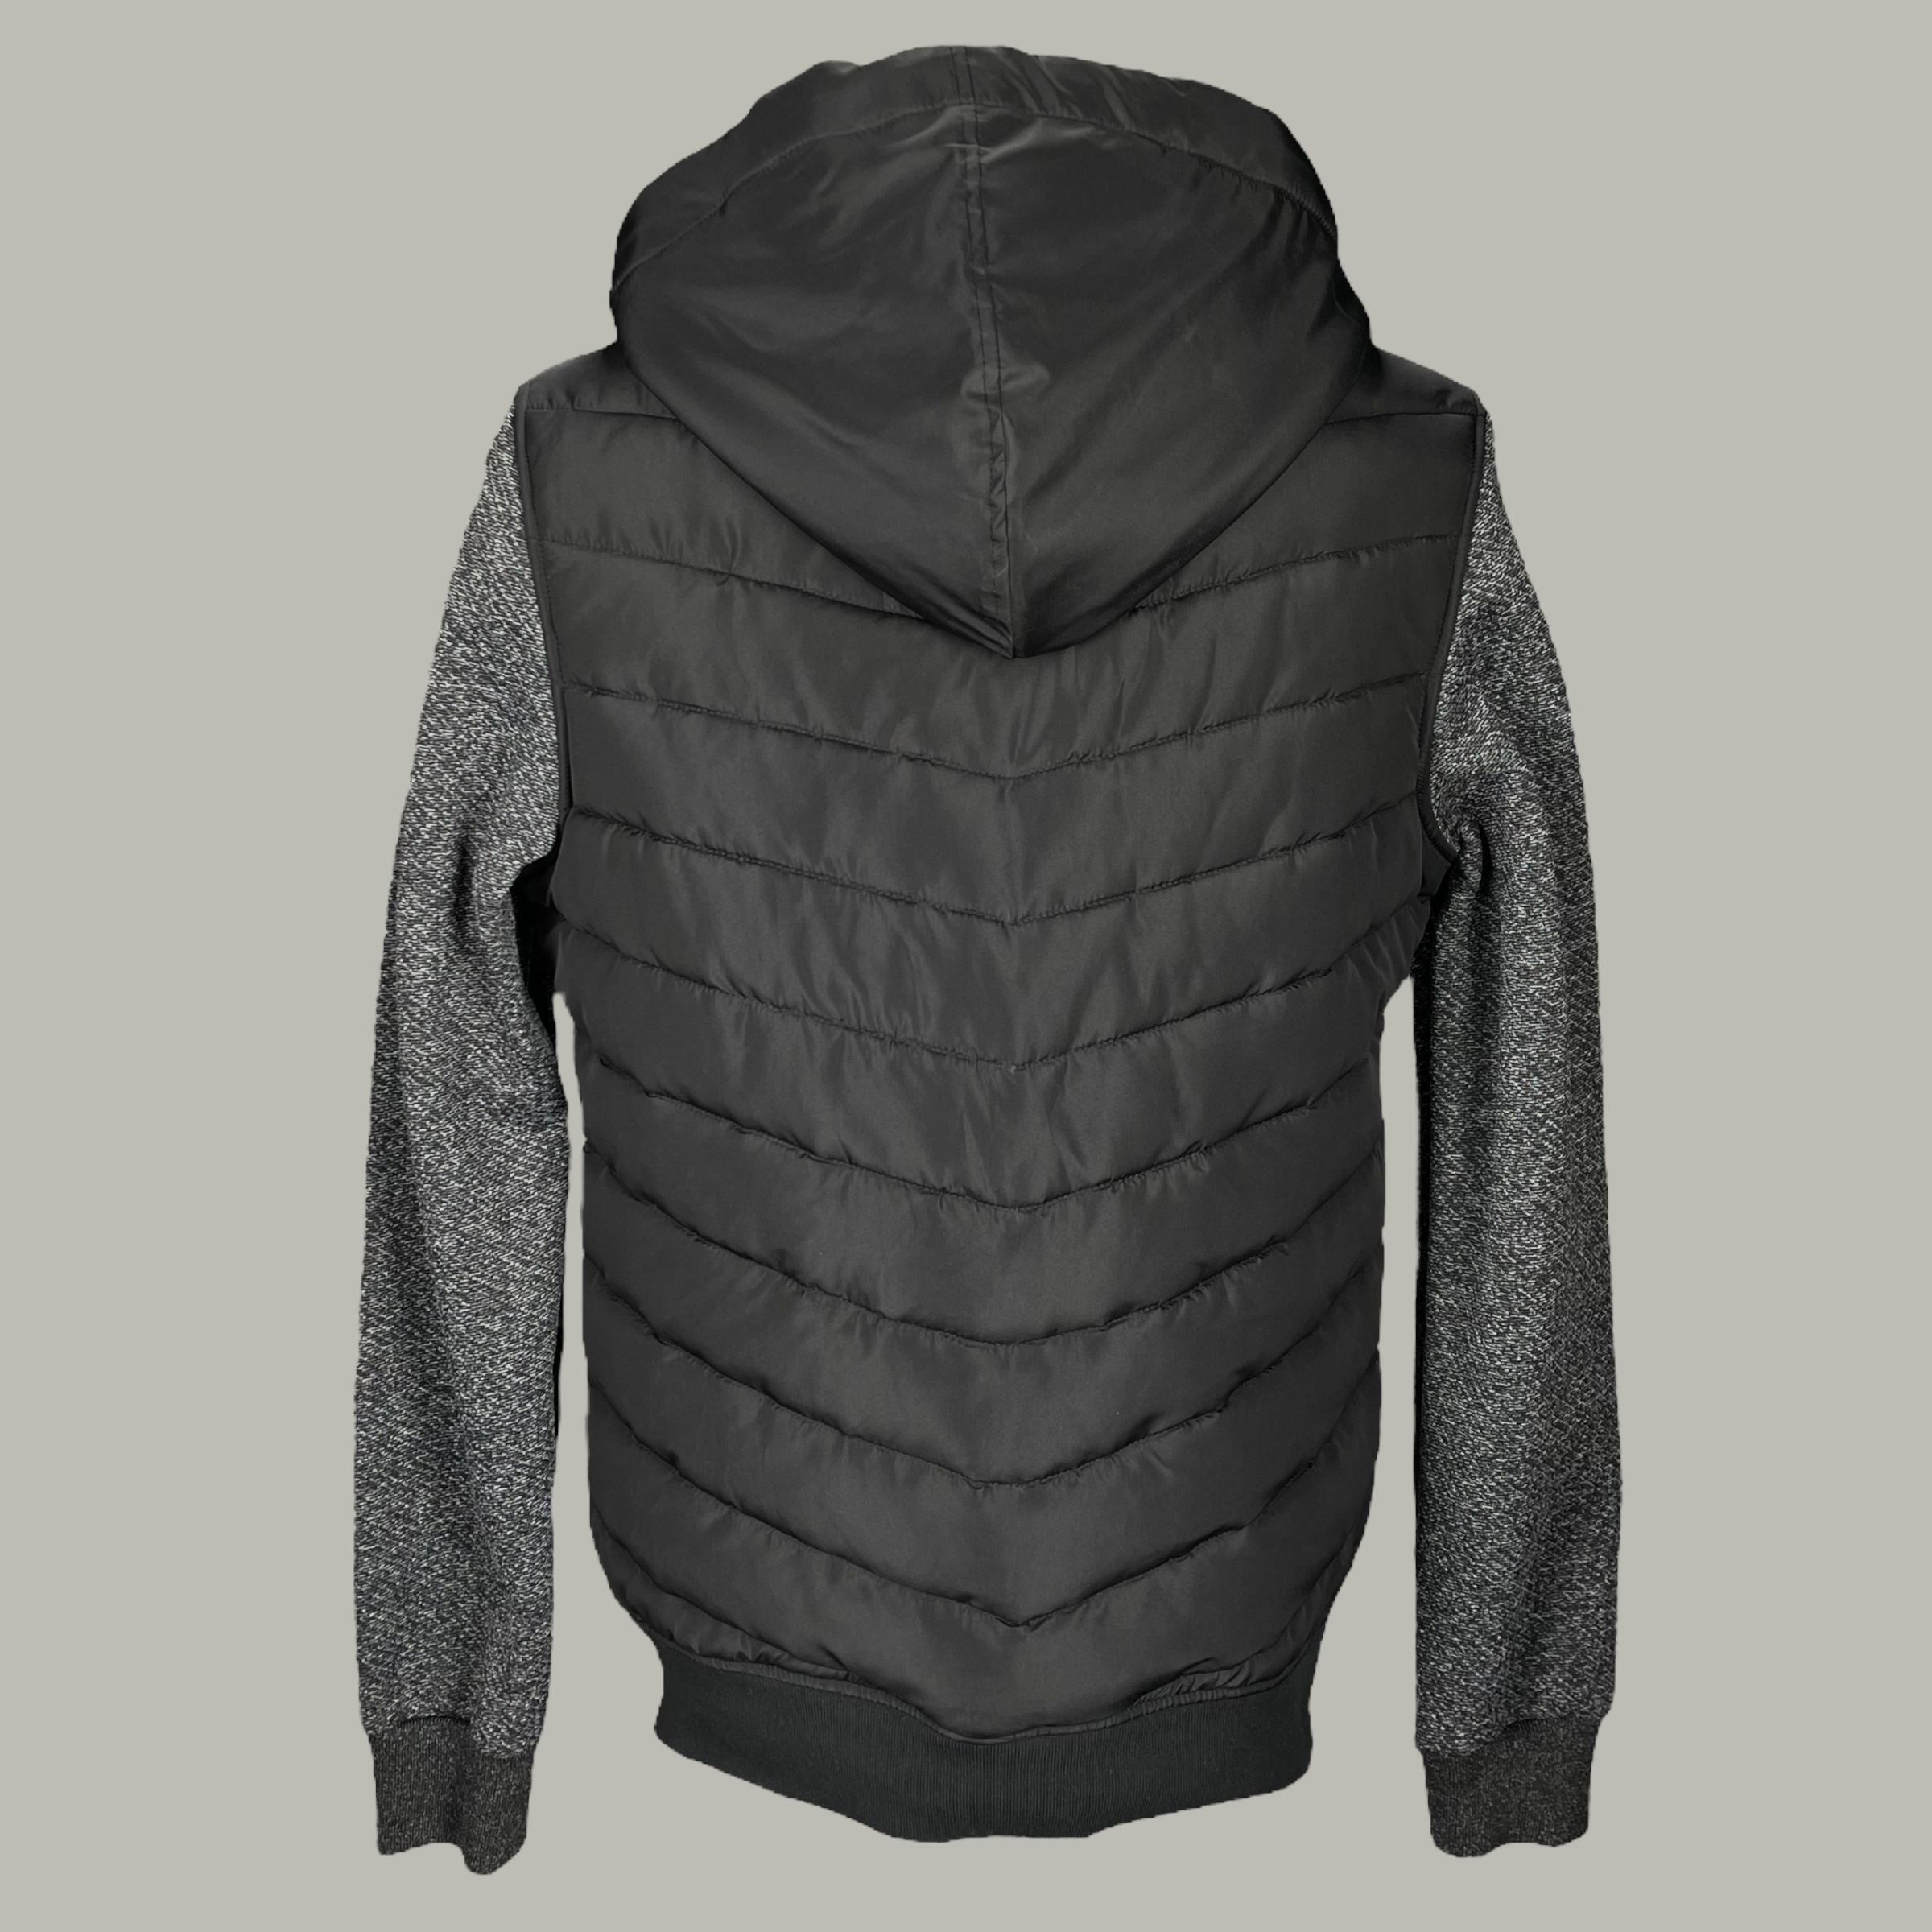 MS100-435 BLK HOODY WITH CORD